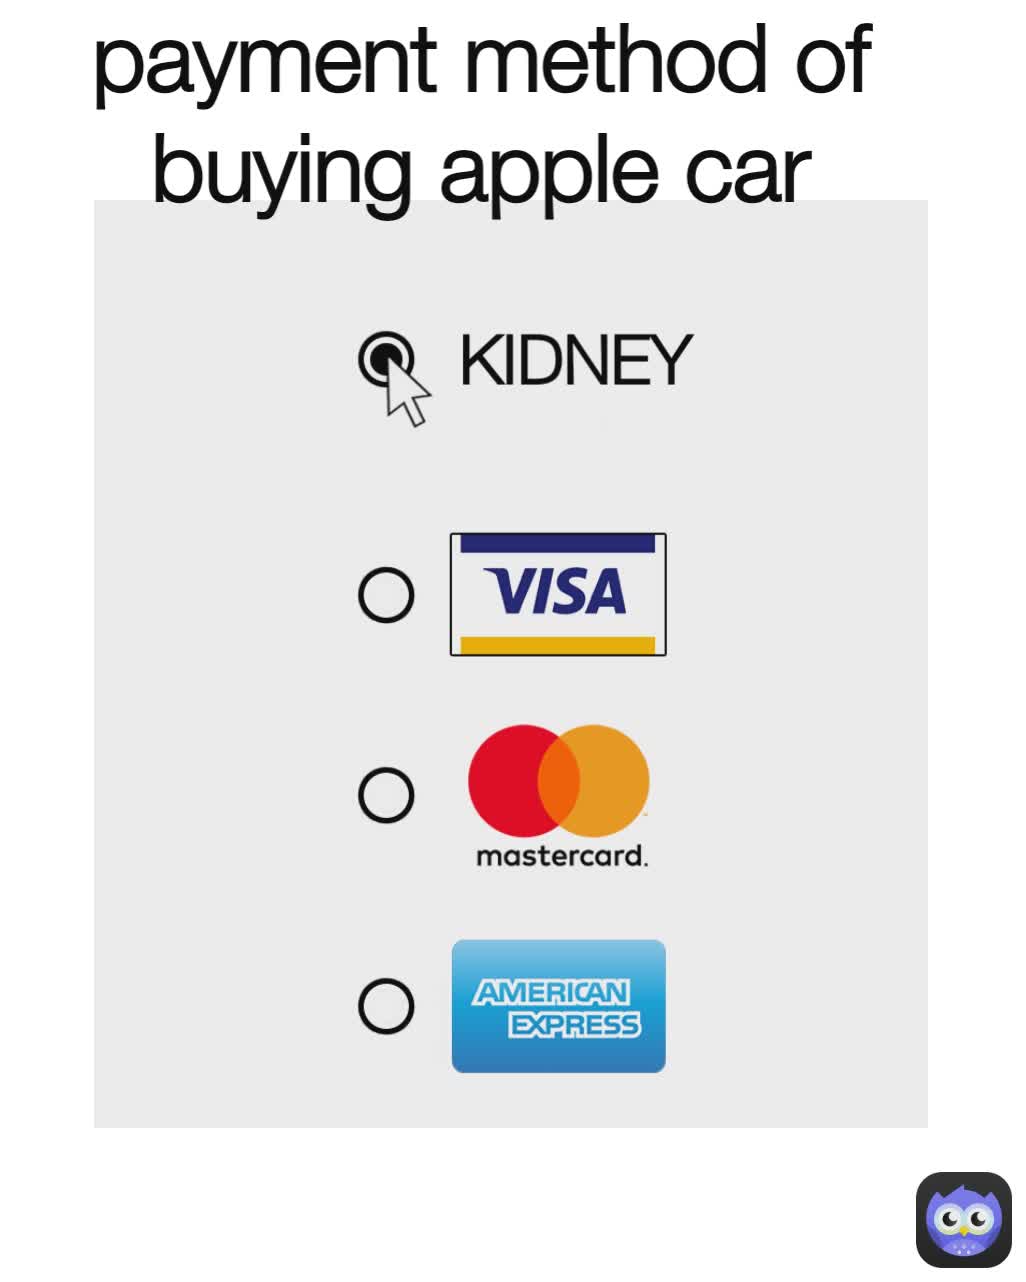 KIDNEY payment method of buying apple car